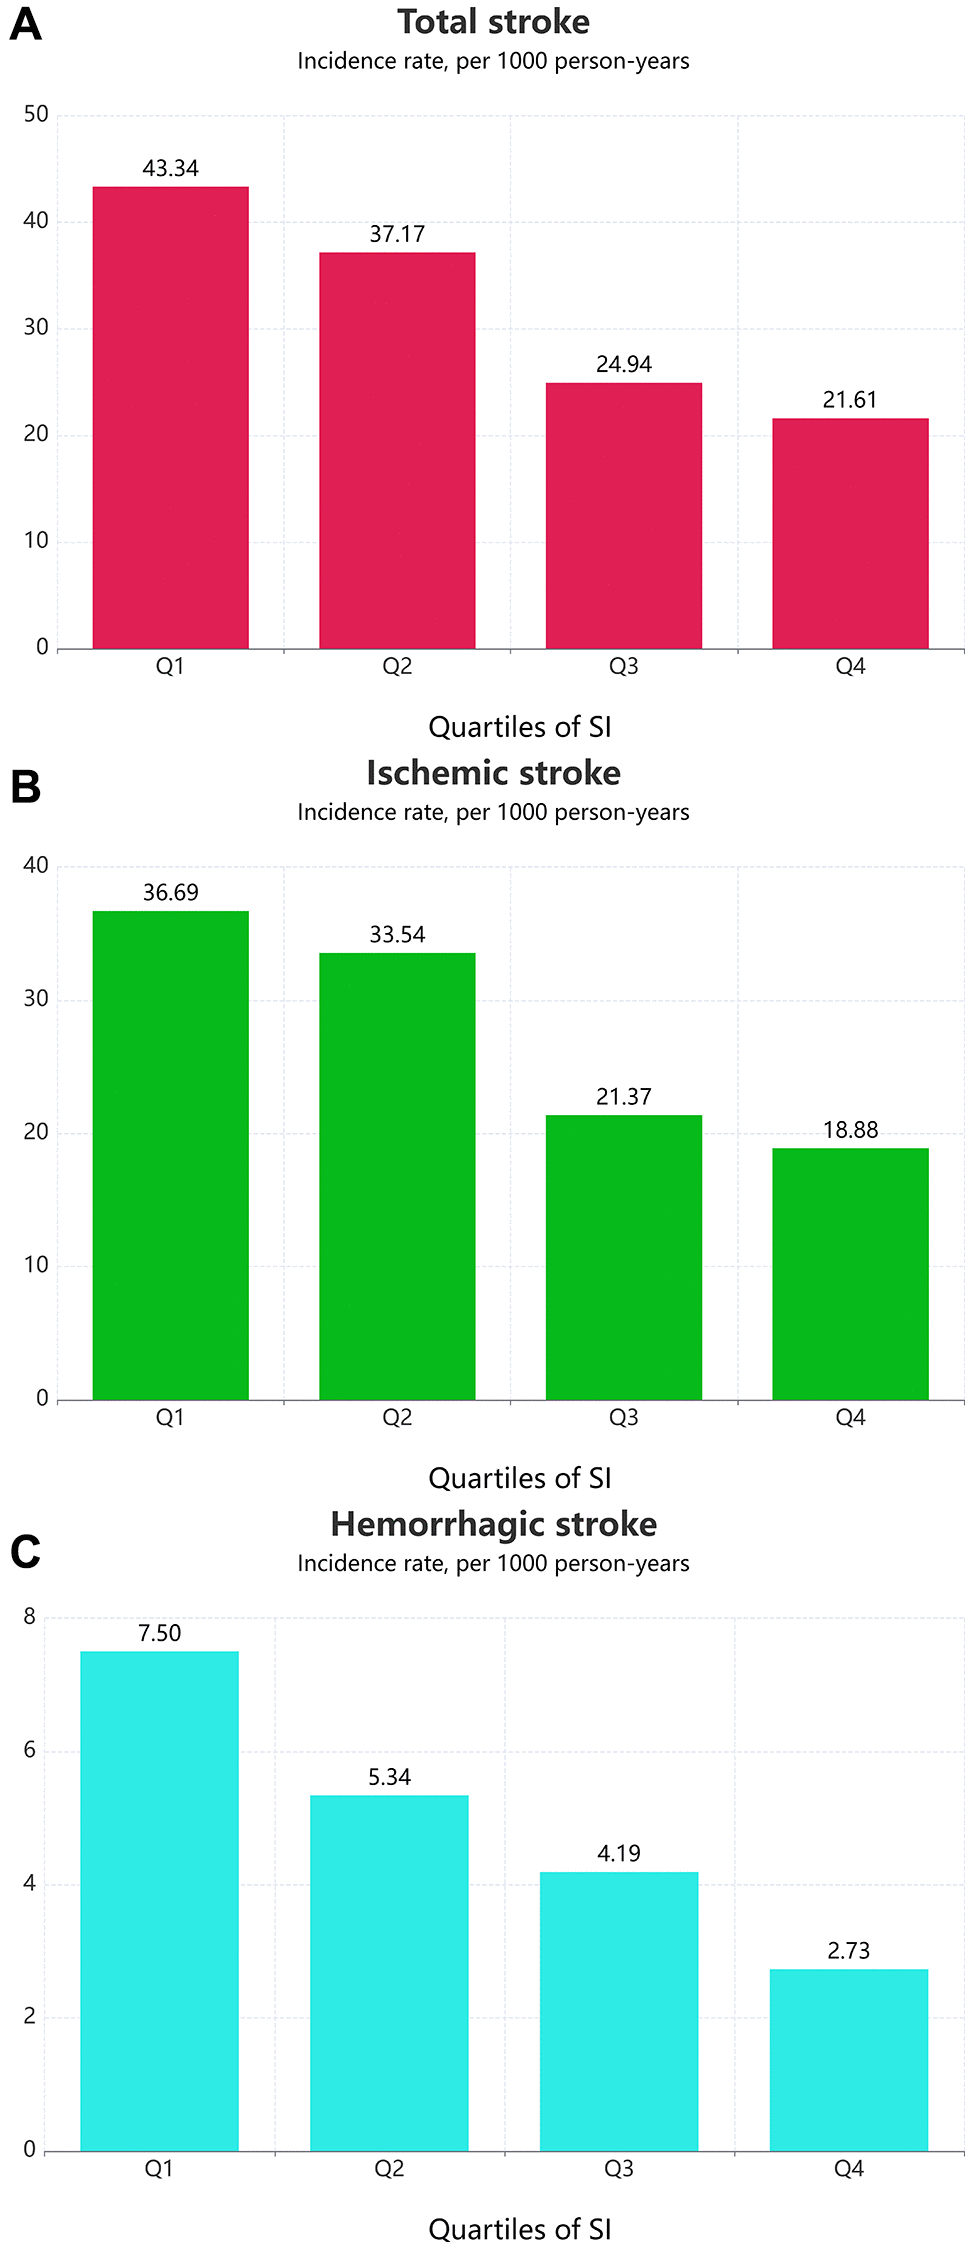 Age-adjusted incidence of outcomes according to the SI quartiles. (A) Total stroke; (B) Ischemic stroke; (C) Hemorrhagic stroke.